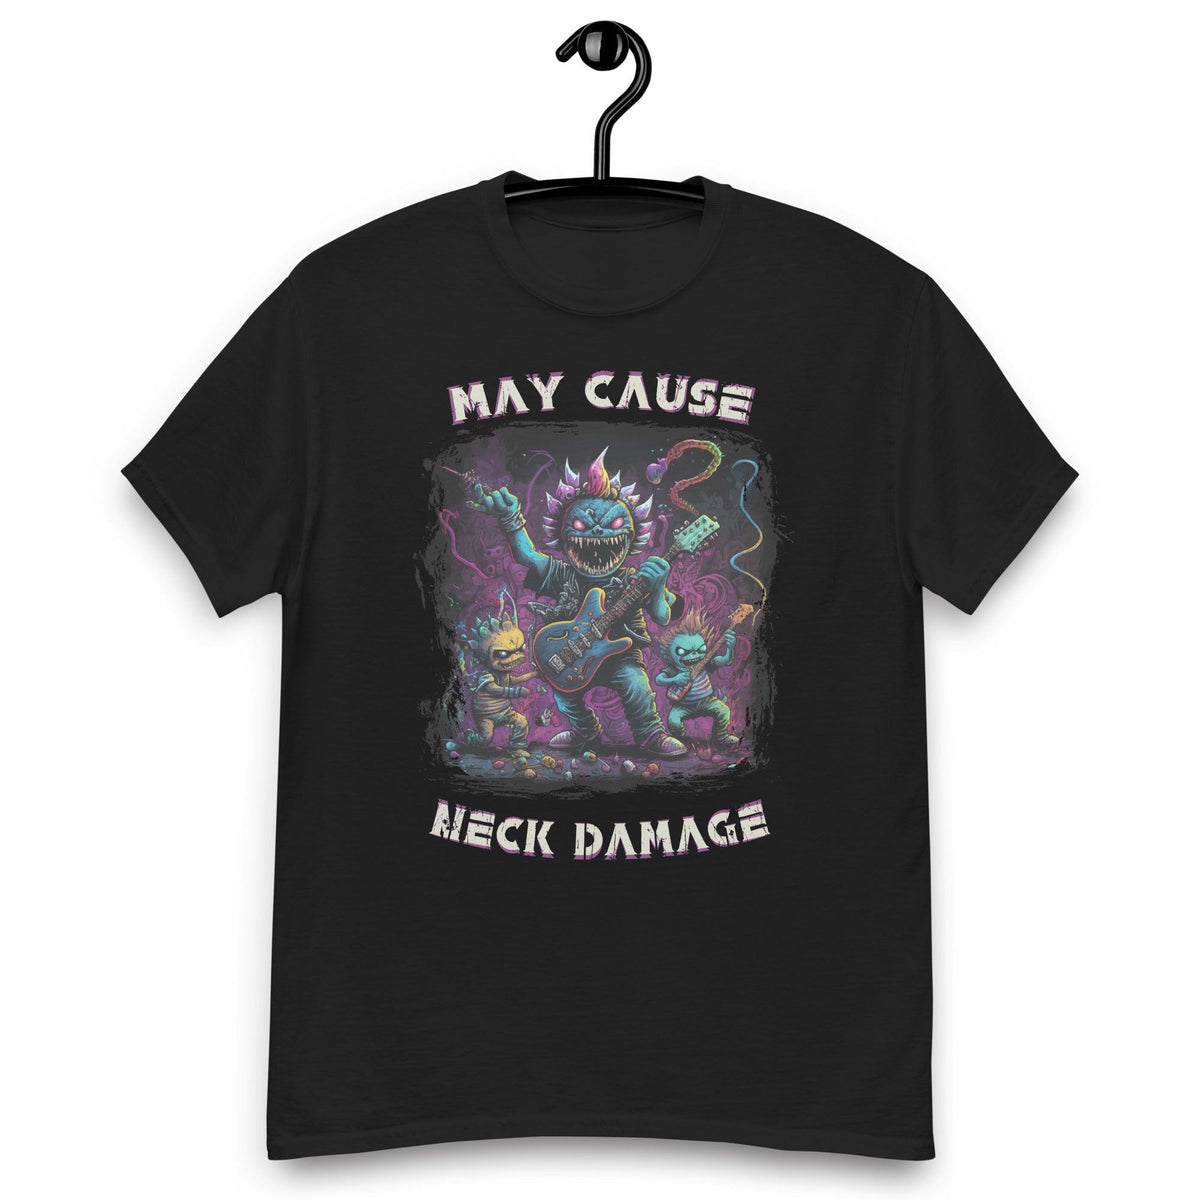 May cause neck damage men's classic tee - Beyond T-shirts